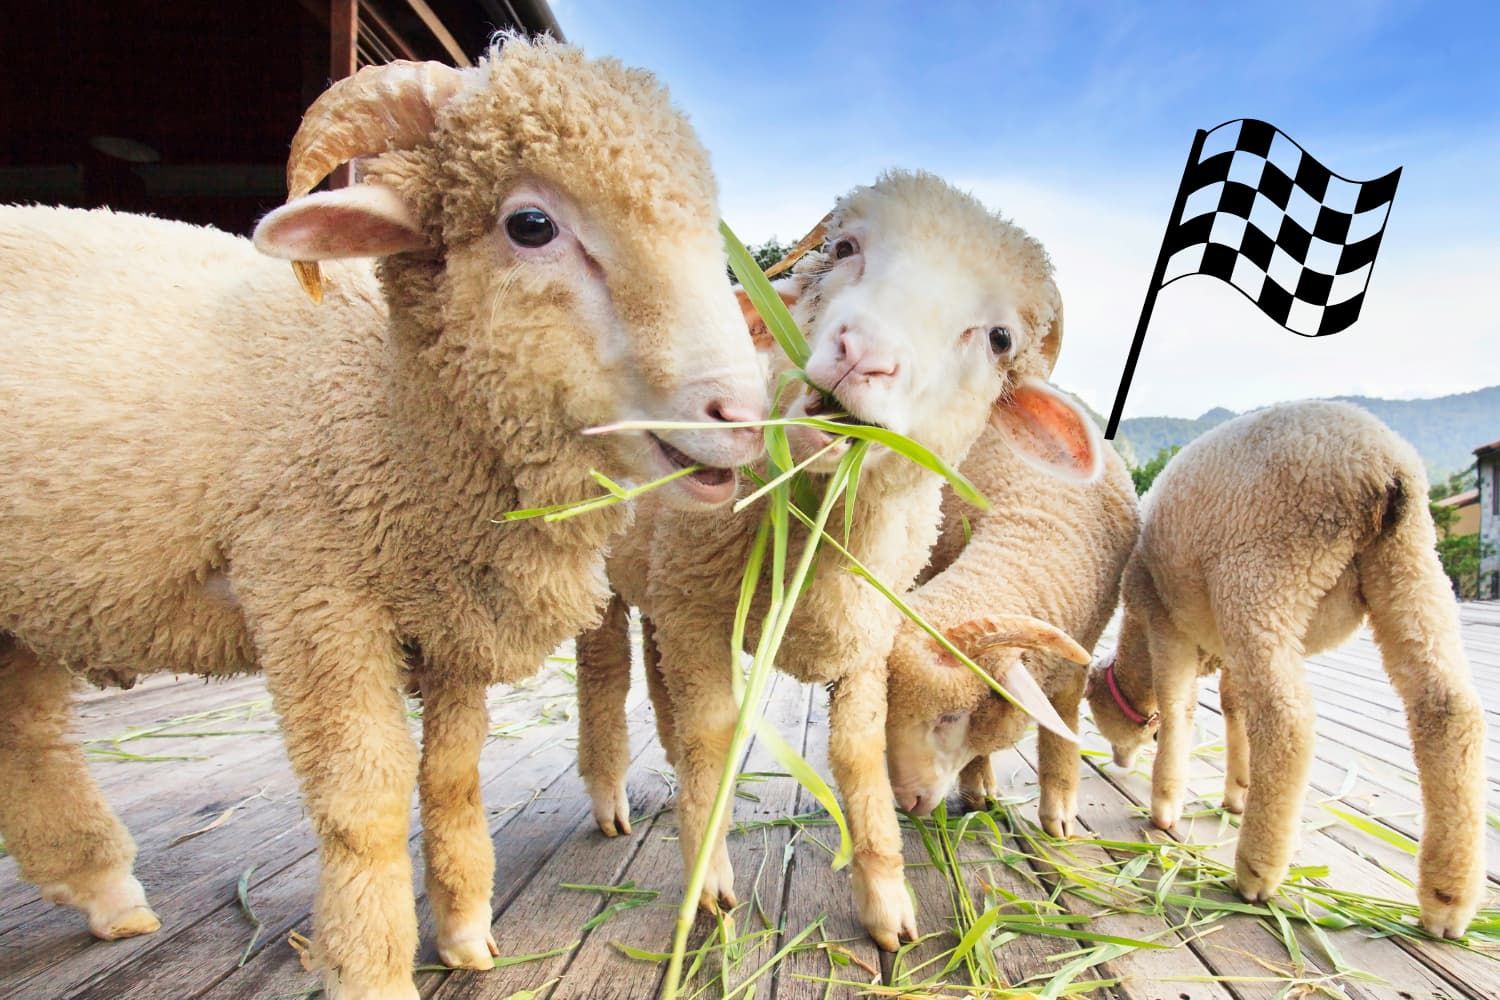 Game%20-%20OT%20Psalm%2023%20-%20The%20feed%20the%20sheep%20relay%20race-6bb58723 Peace